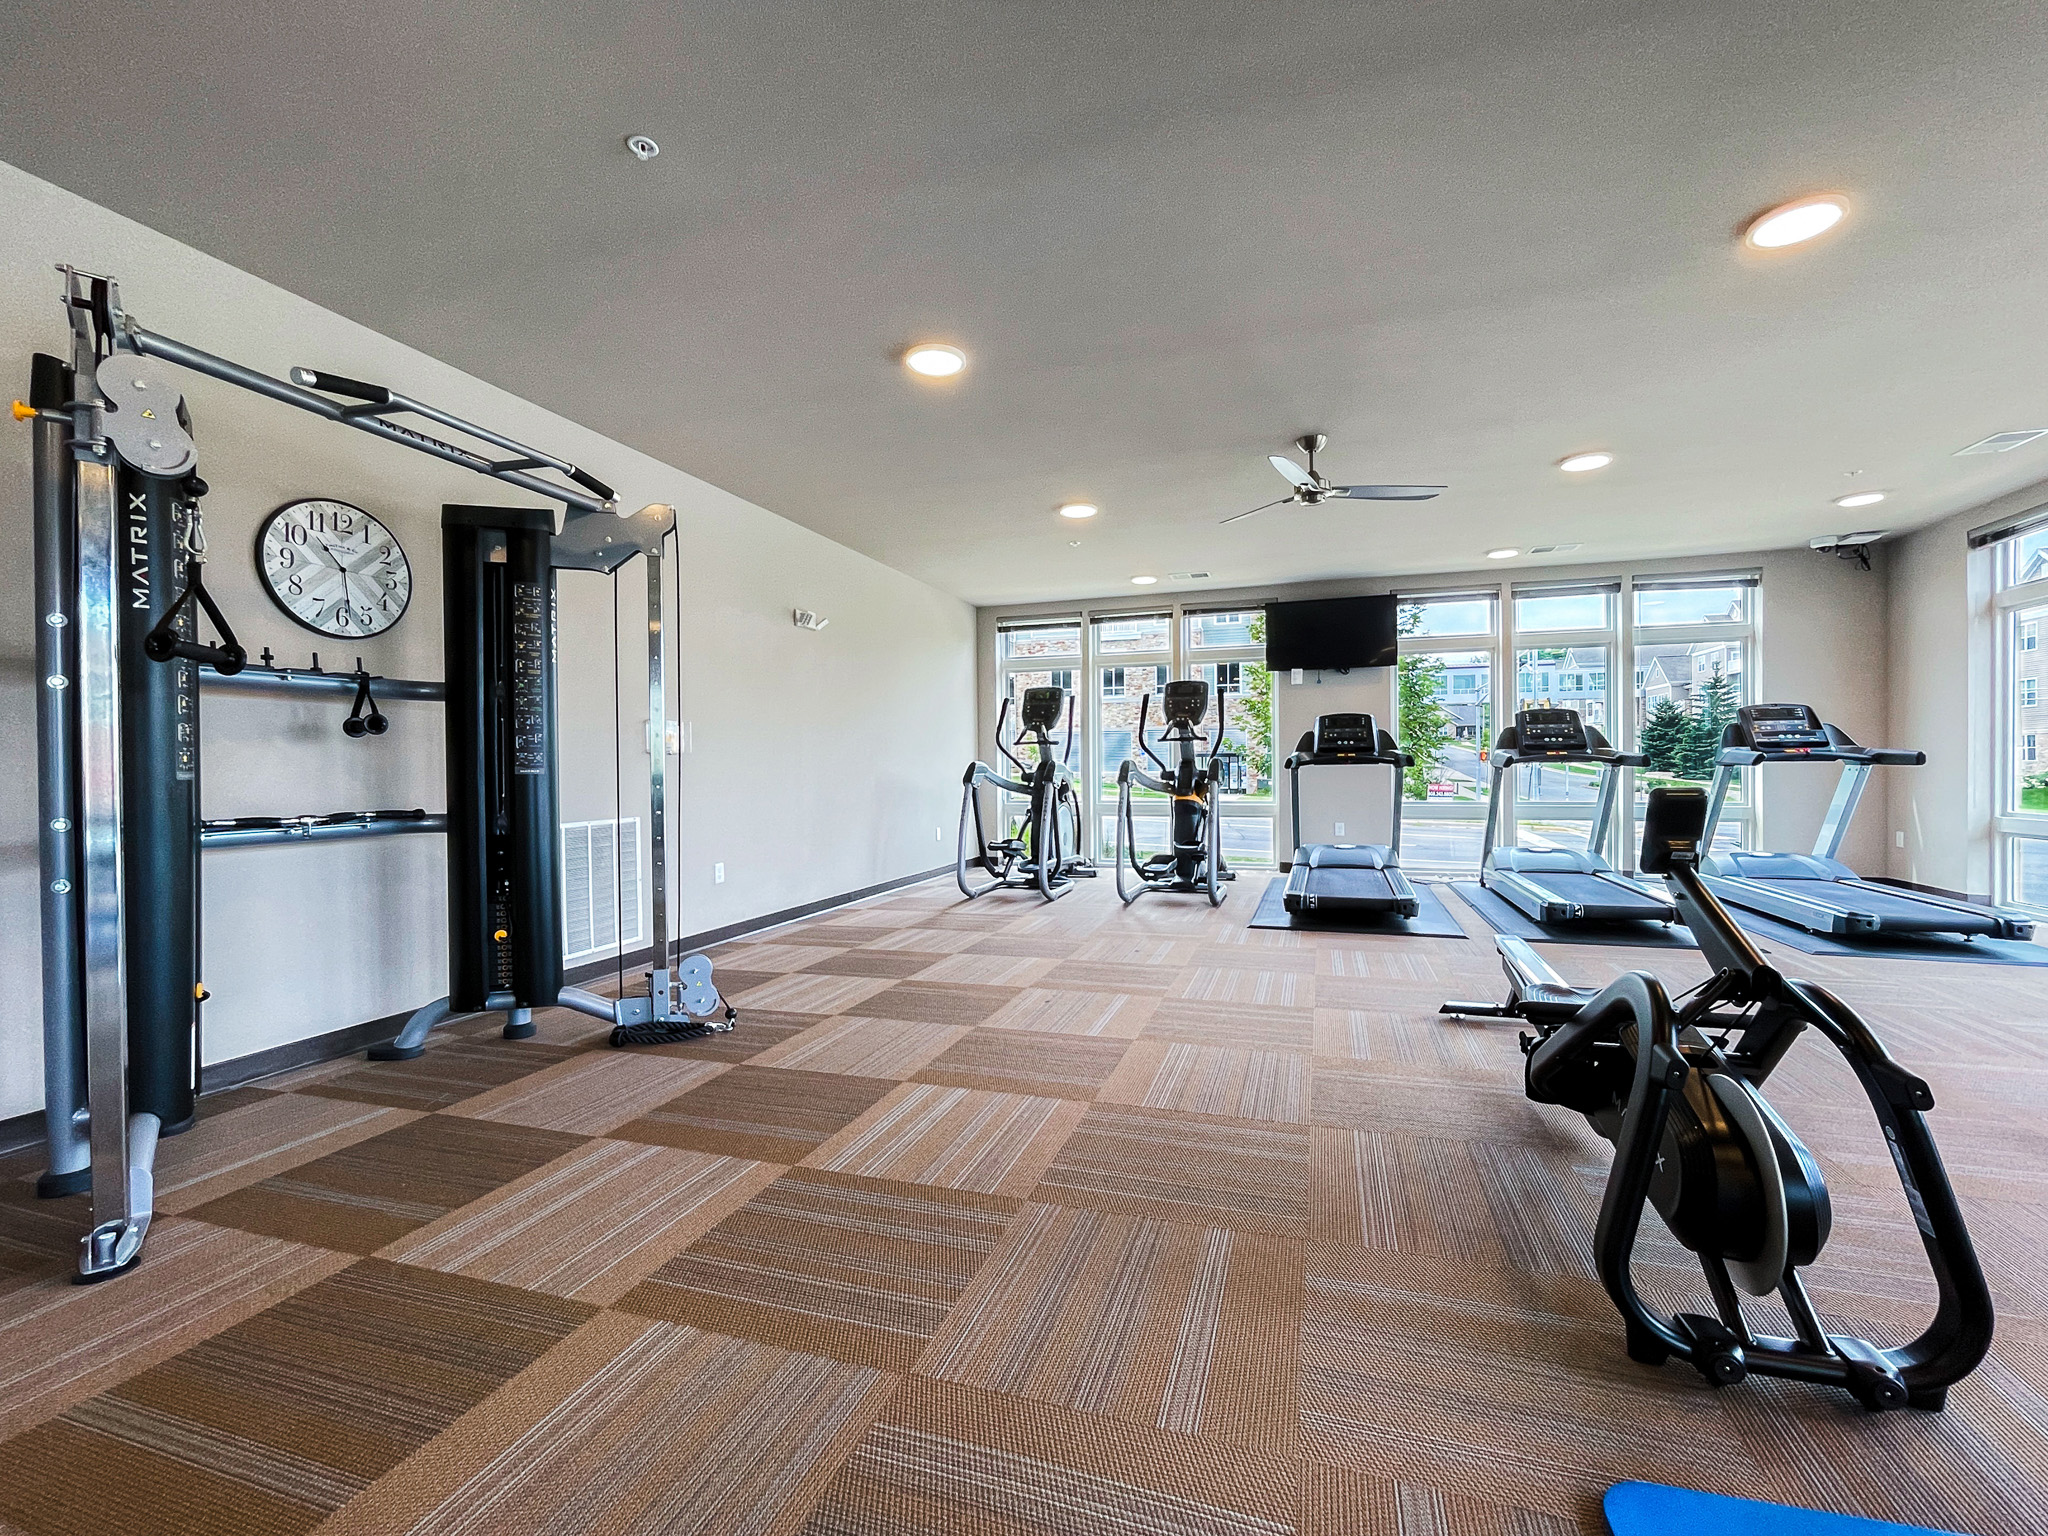 A gym area with floor to ceiling windows and various workout equipment around the room